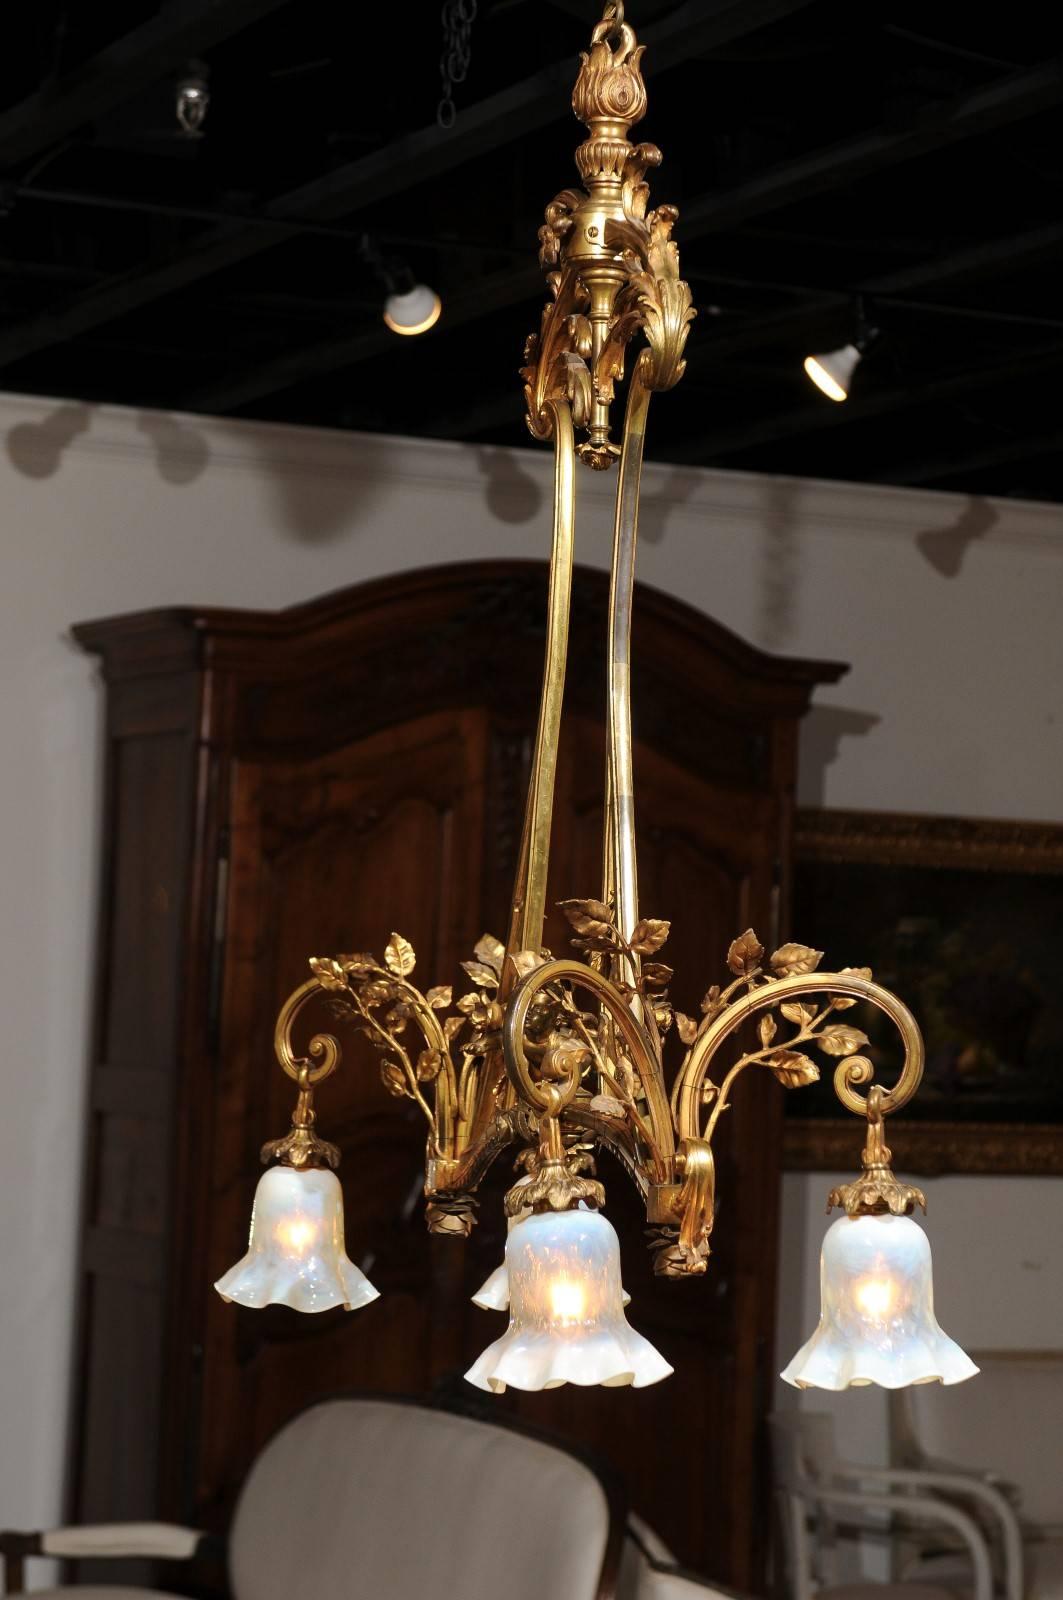 A French ormolu four-light chandelier with mounted cherub, vines, leaves and cloches shades from the 19th century. This French gilt bronze chandelier features a central armature adorned with acanthus leaves at the top, leading the eye down to